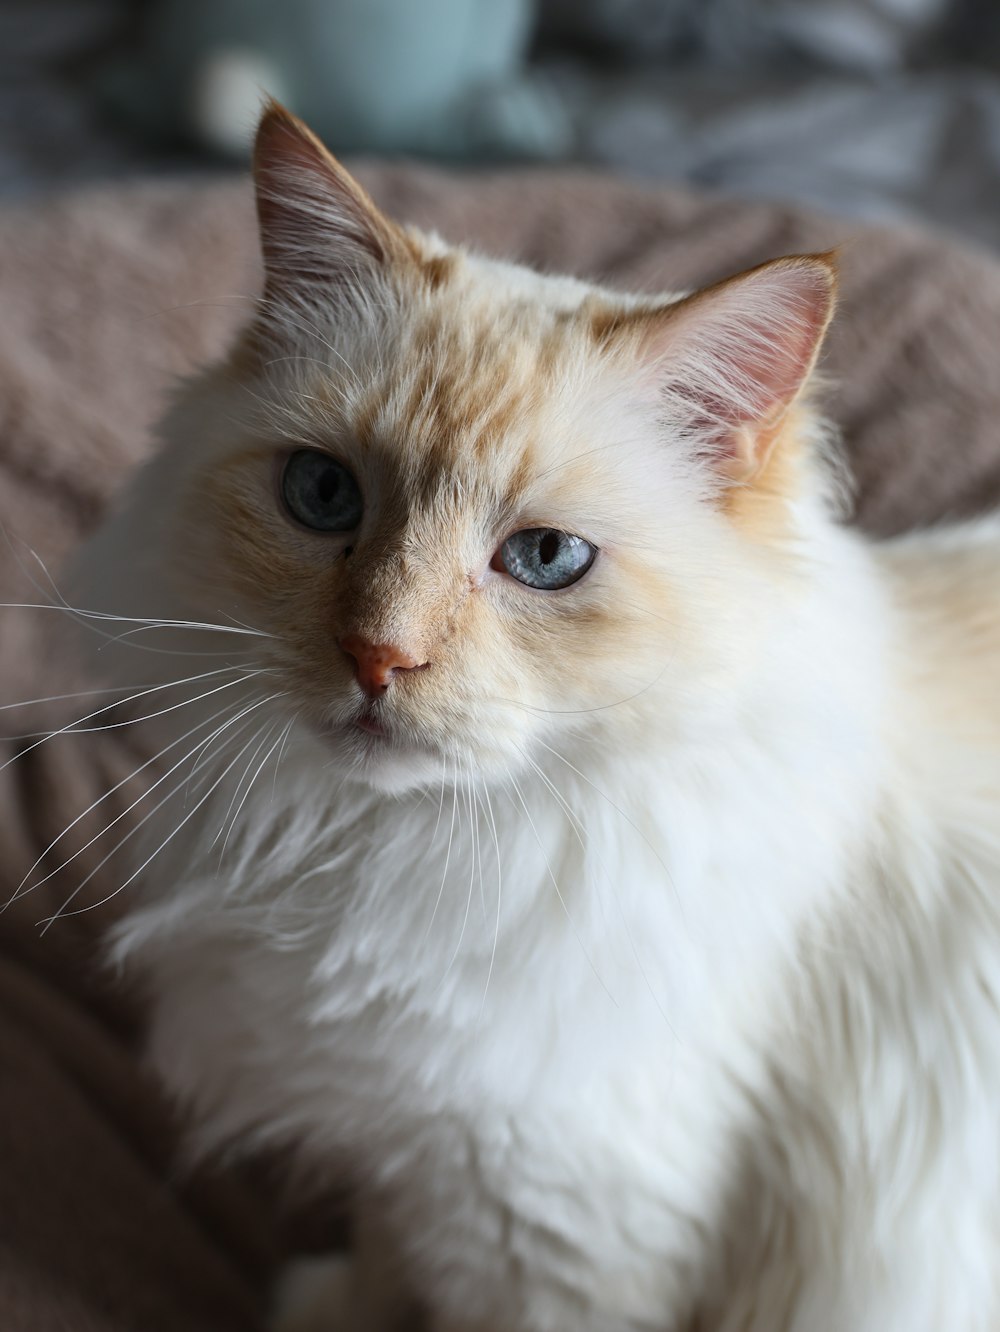 a white cat with blue eyes sitting on a bed